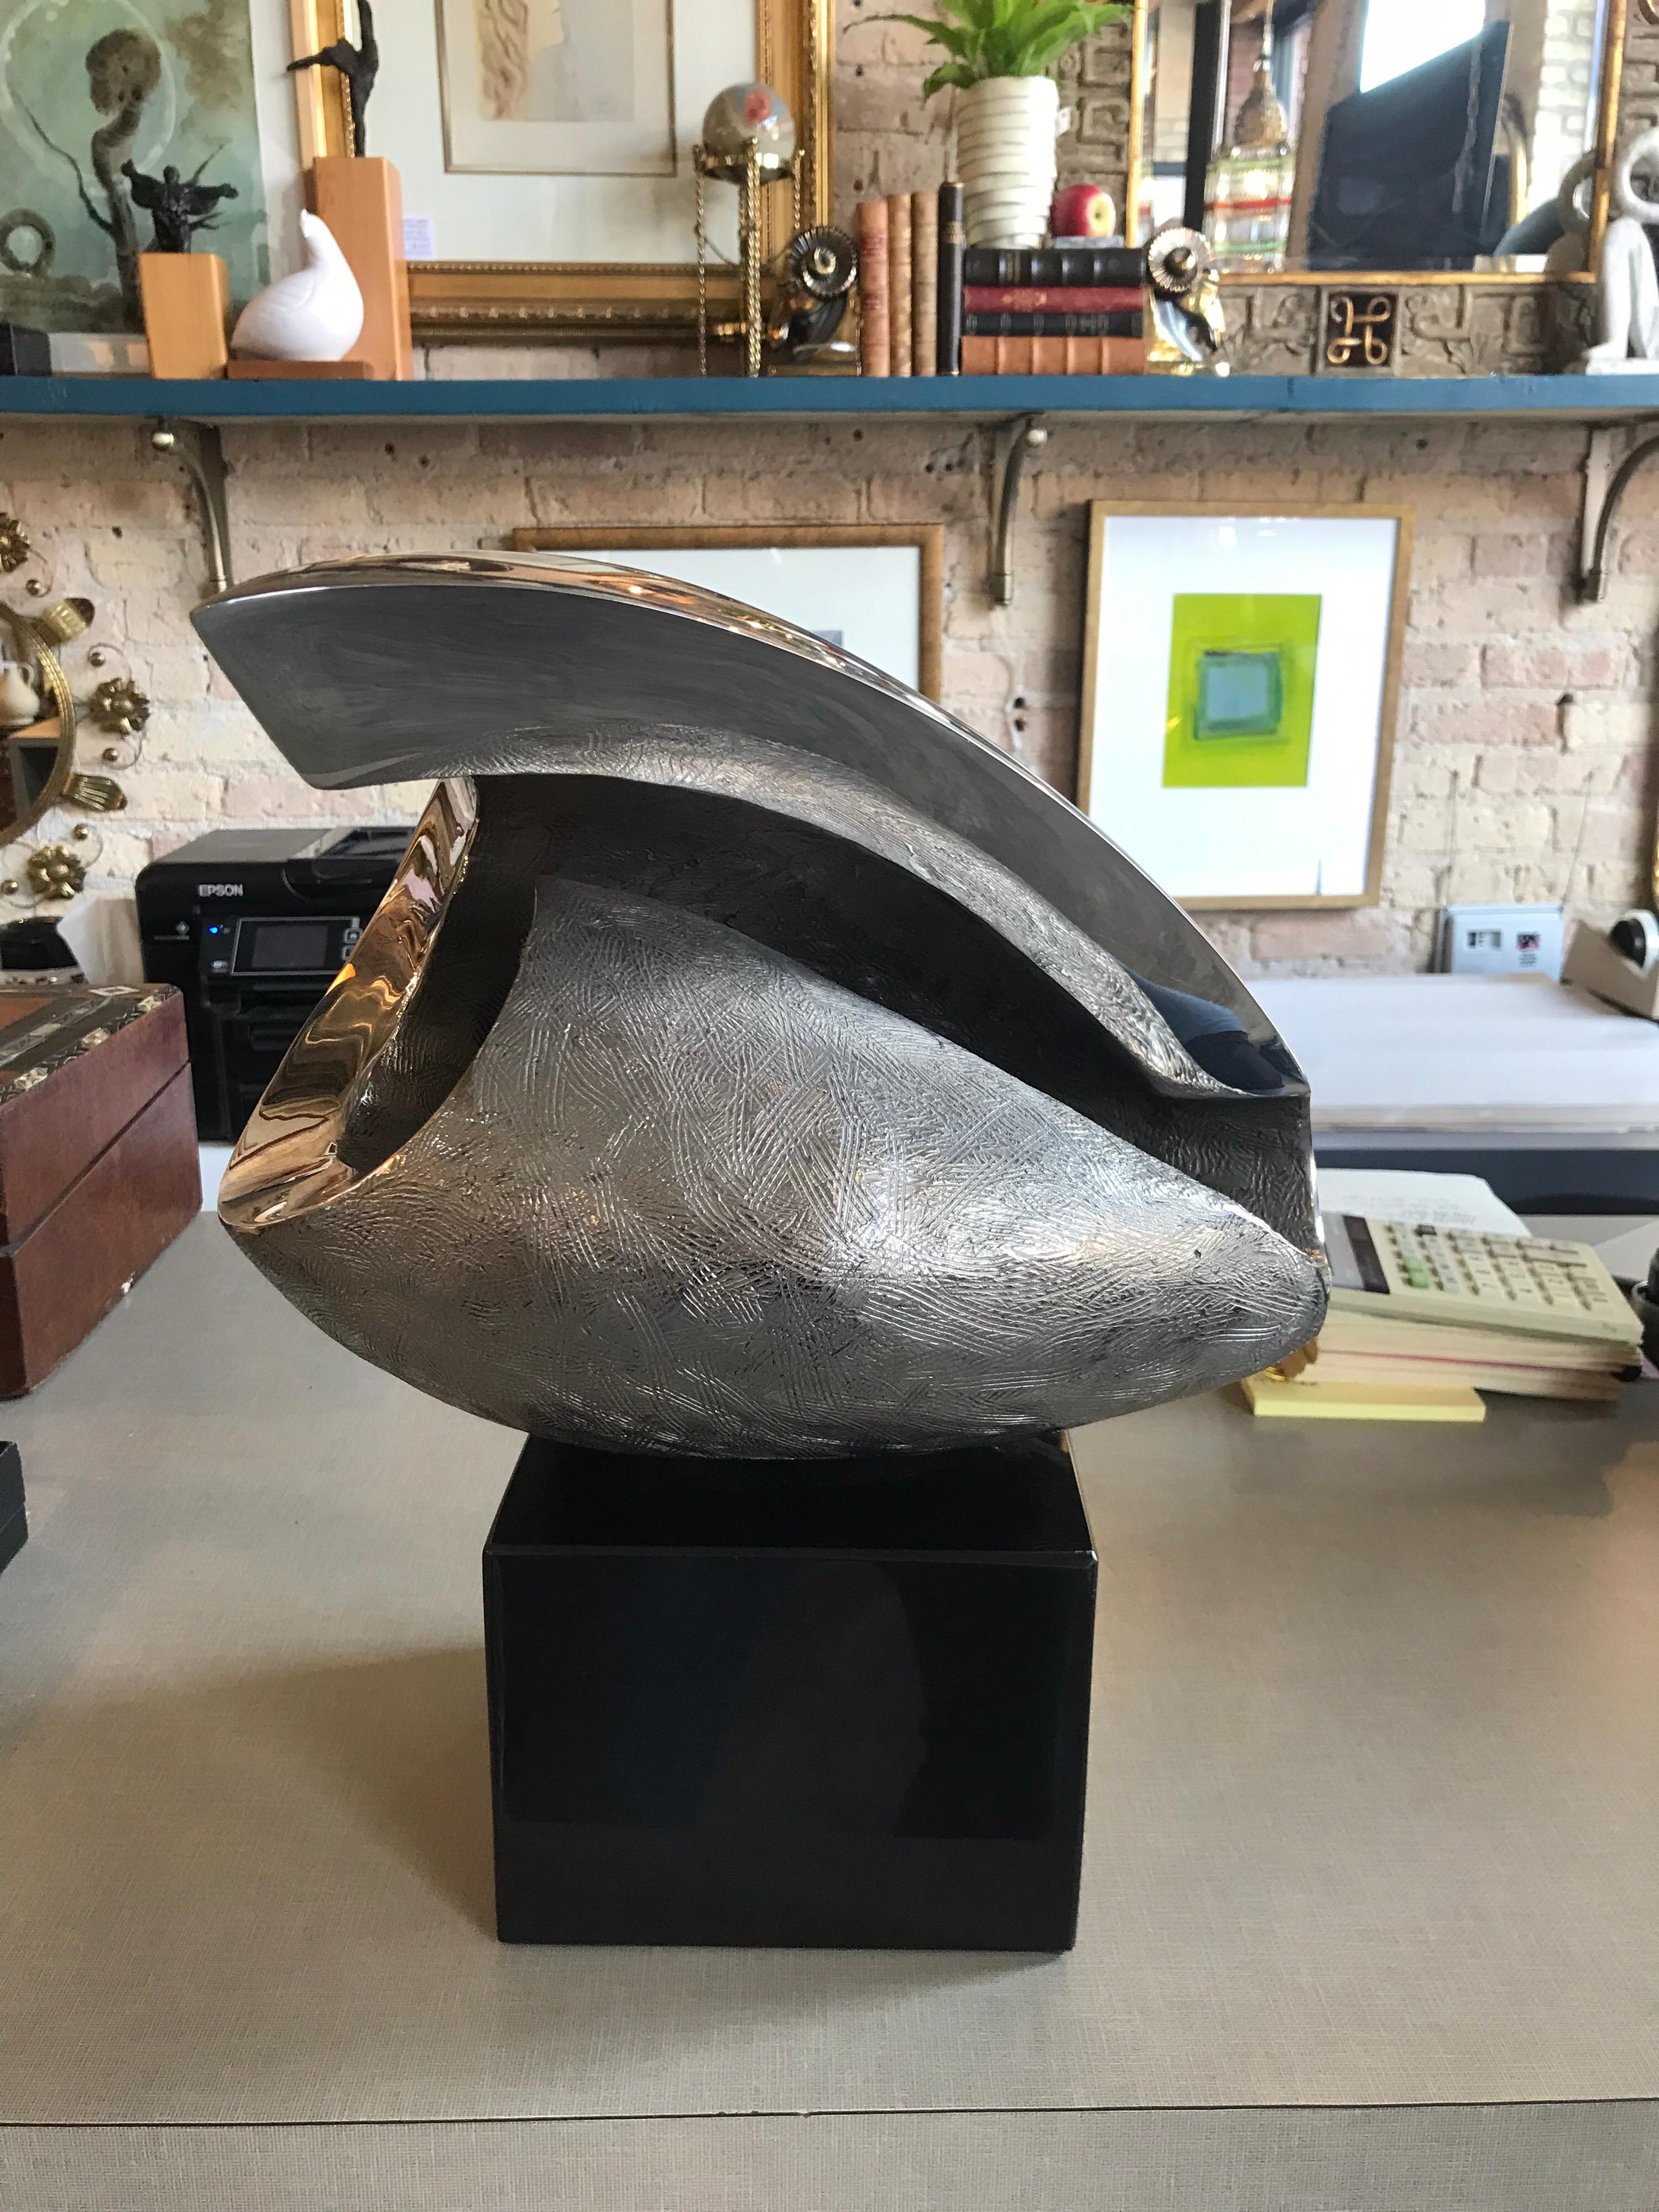 This is an abstract etched chrome sculpture by S.S. Barron the second in 1991 The sculpture is mounted on a metal stand that rotates to different positions. It is the first out of 9 made.